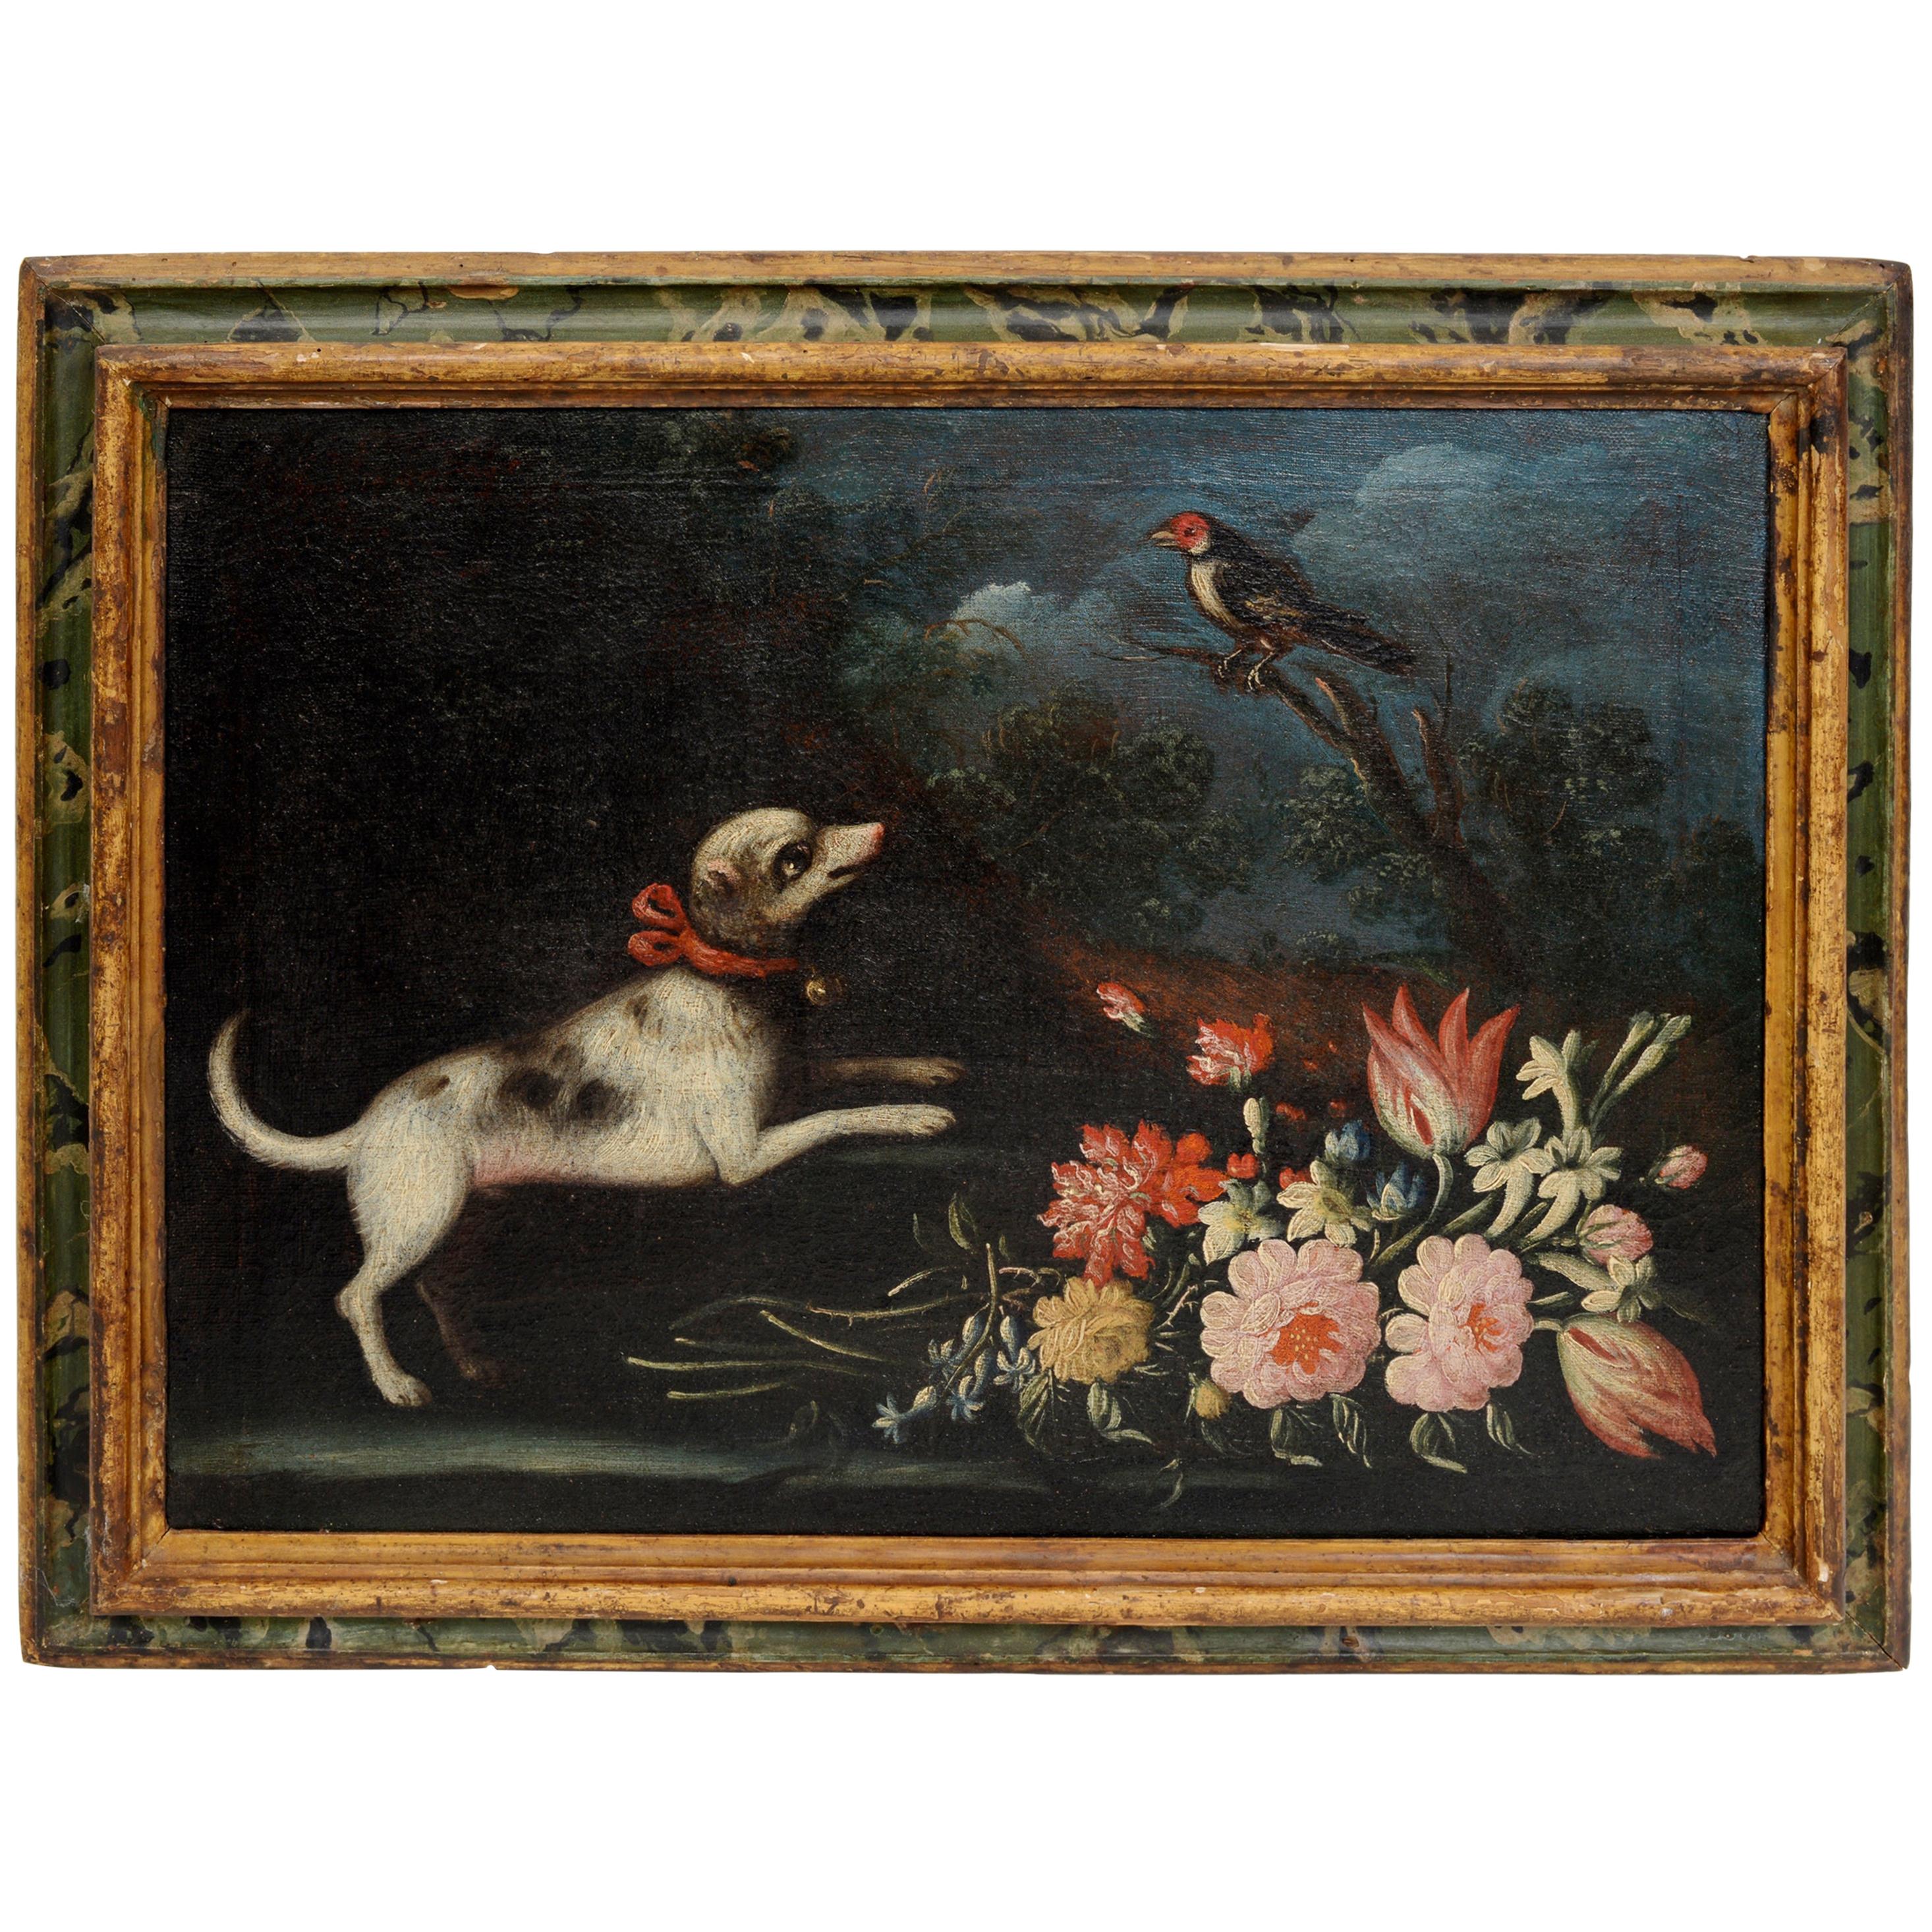 Early 18th Century Floral Still Life, Piedmontese School with a Dog and Bird